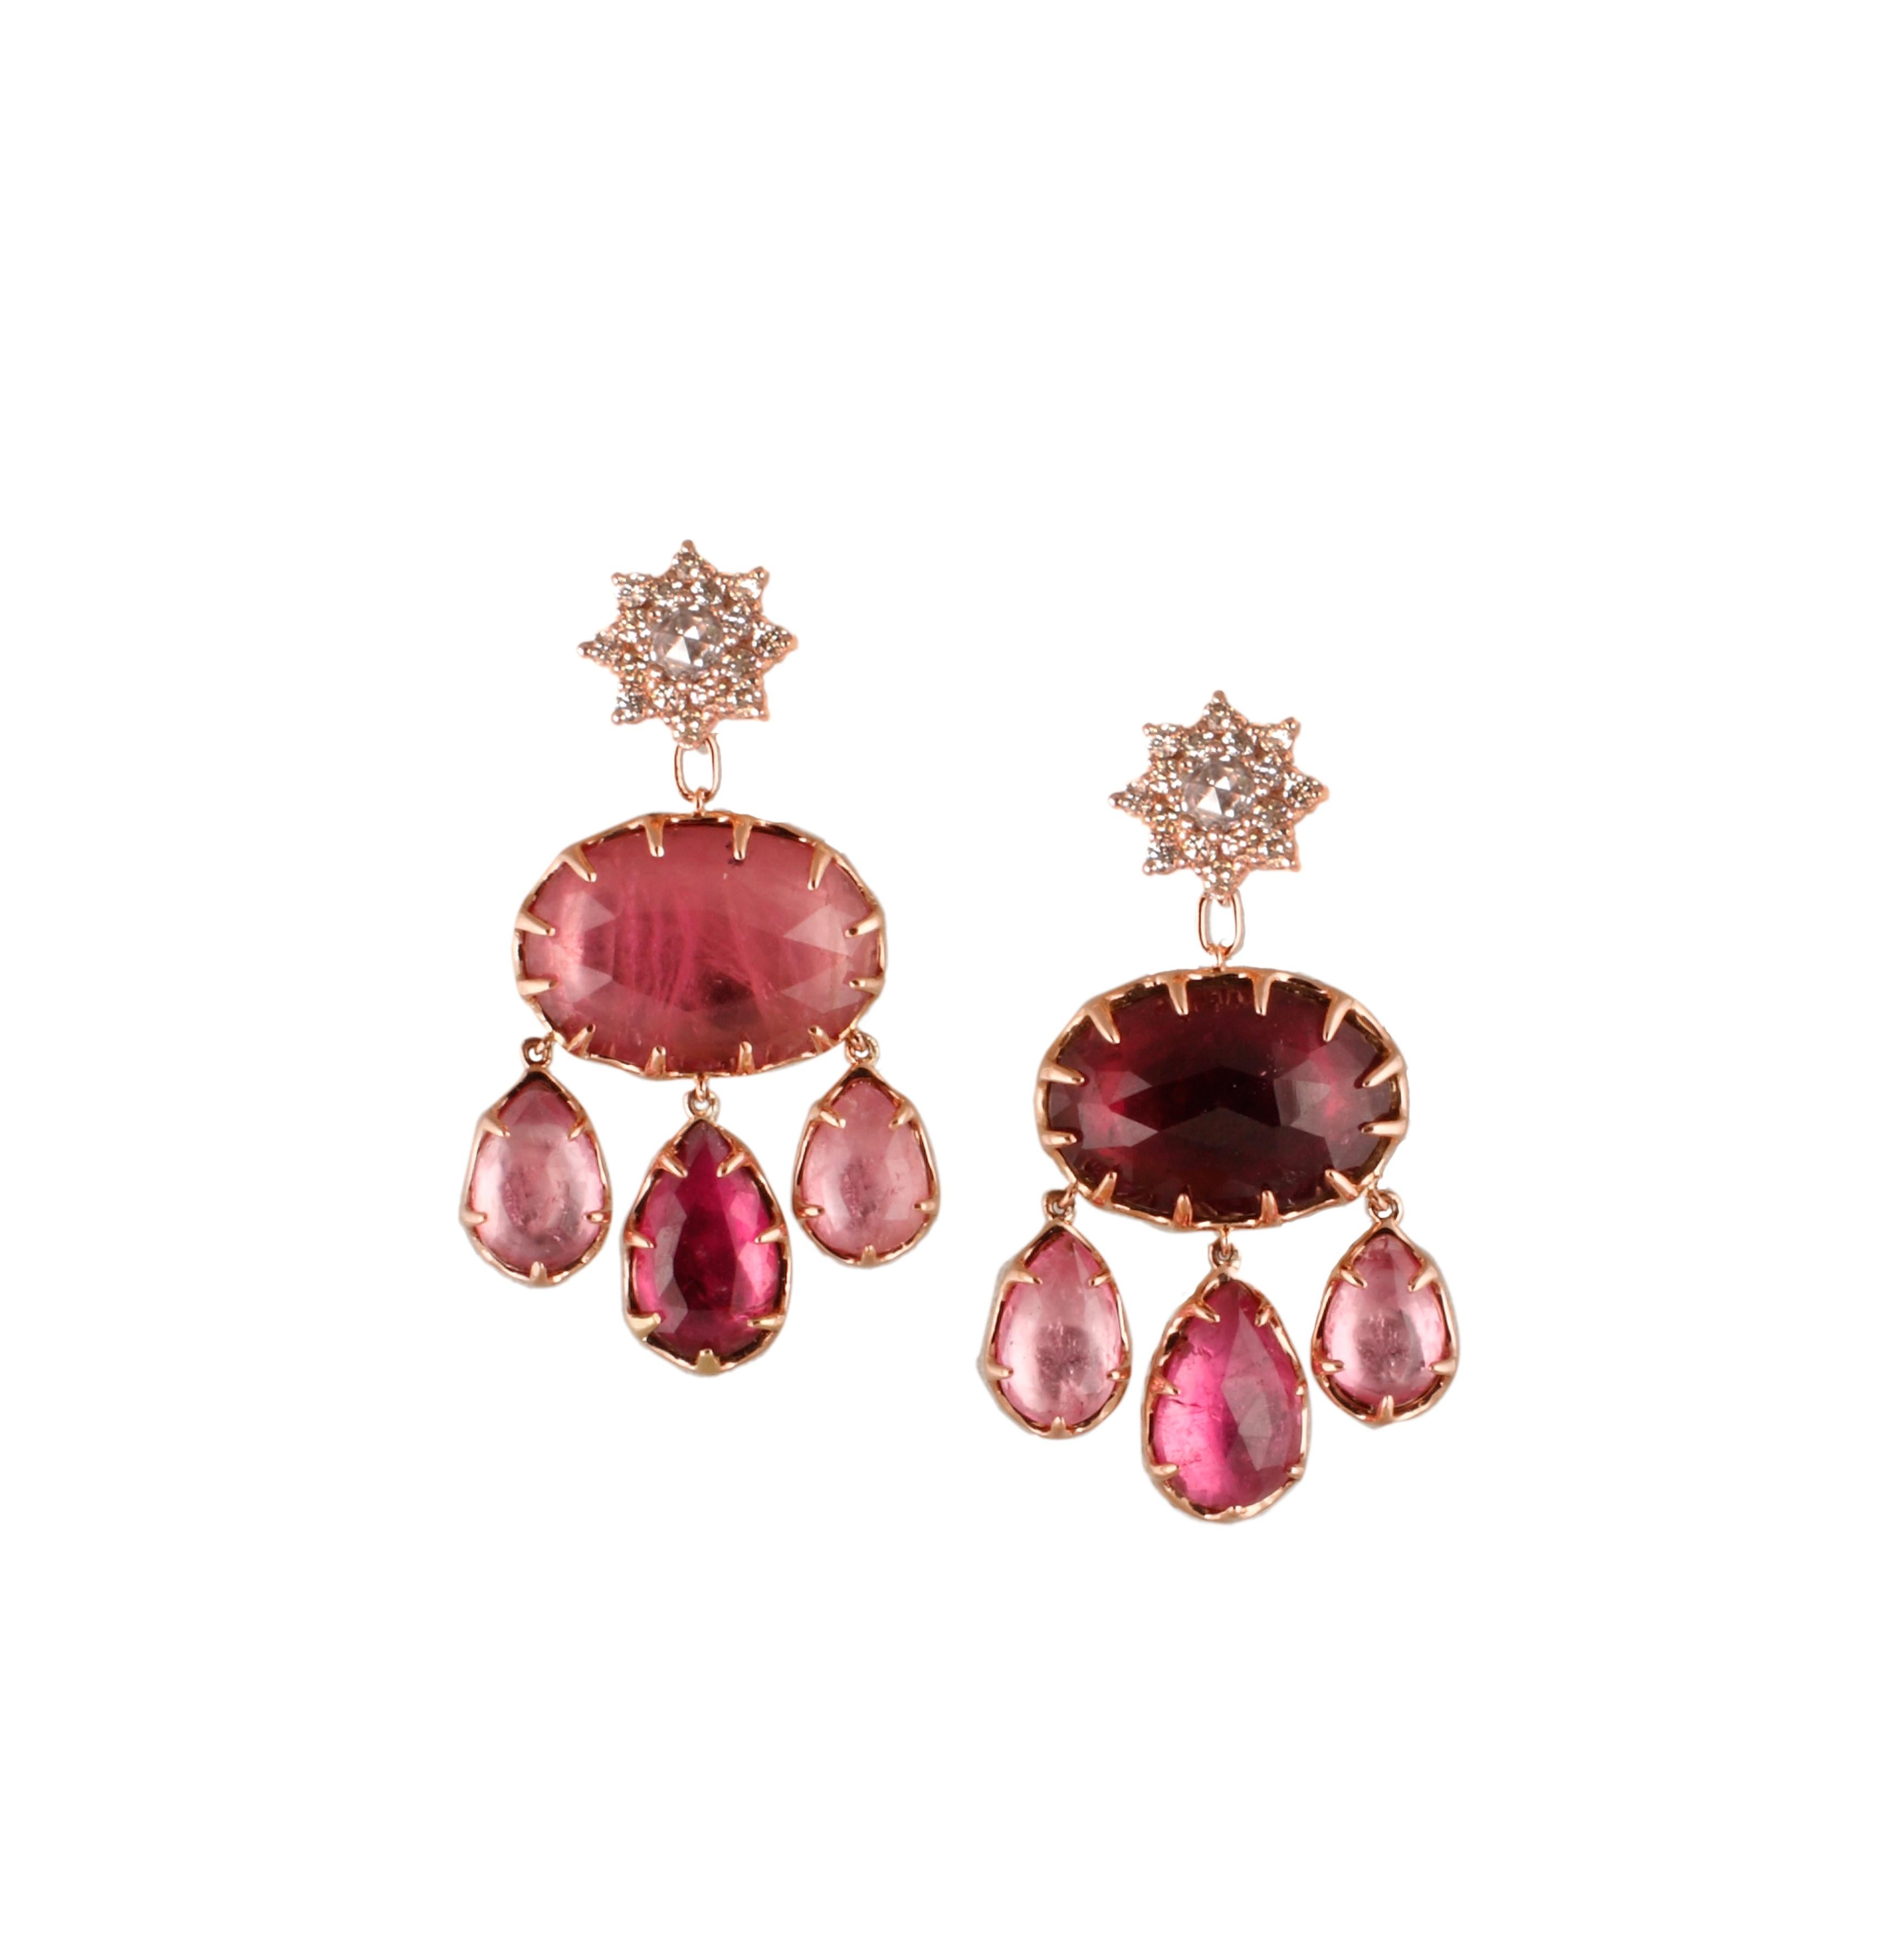 Parulina Couture Fine Jewelry- Stunning reversable diamond (4.74tcw) and rubellite (20.29tcw) earrings.
Constructed out of 18K gold with a post back and push-springe closure. 
These earrings can be worn 3 different ways...
1. Diamond dangle front